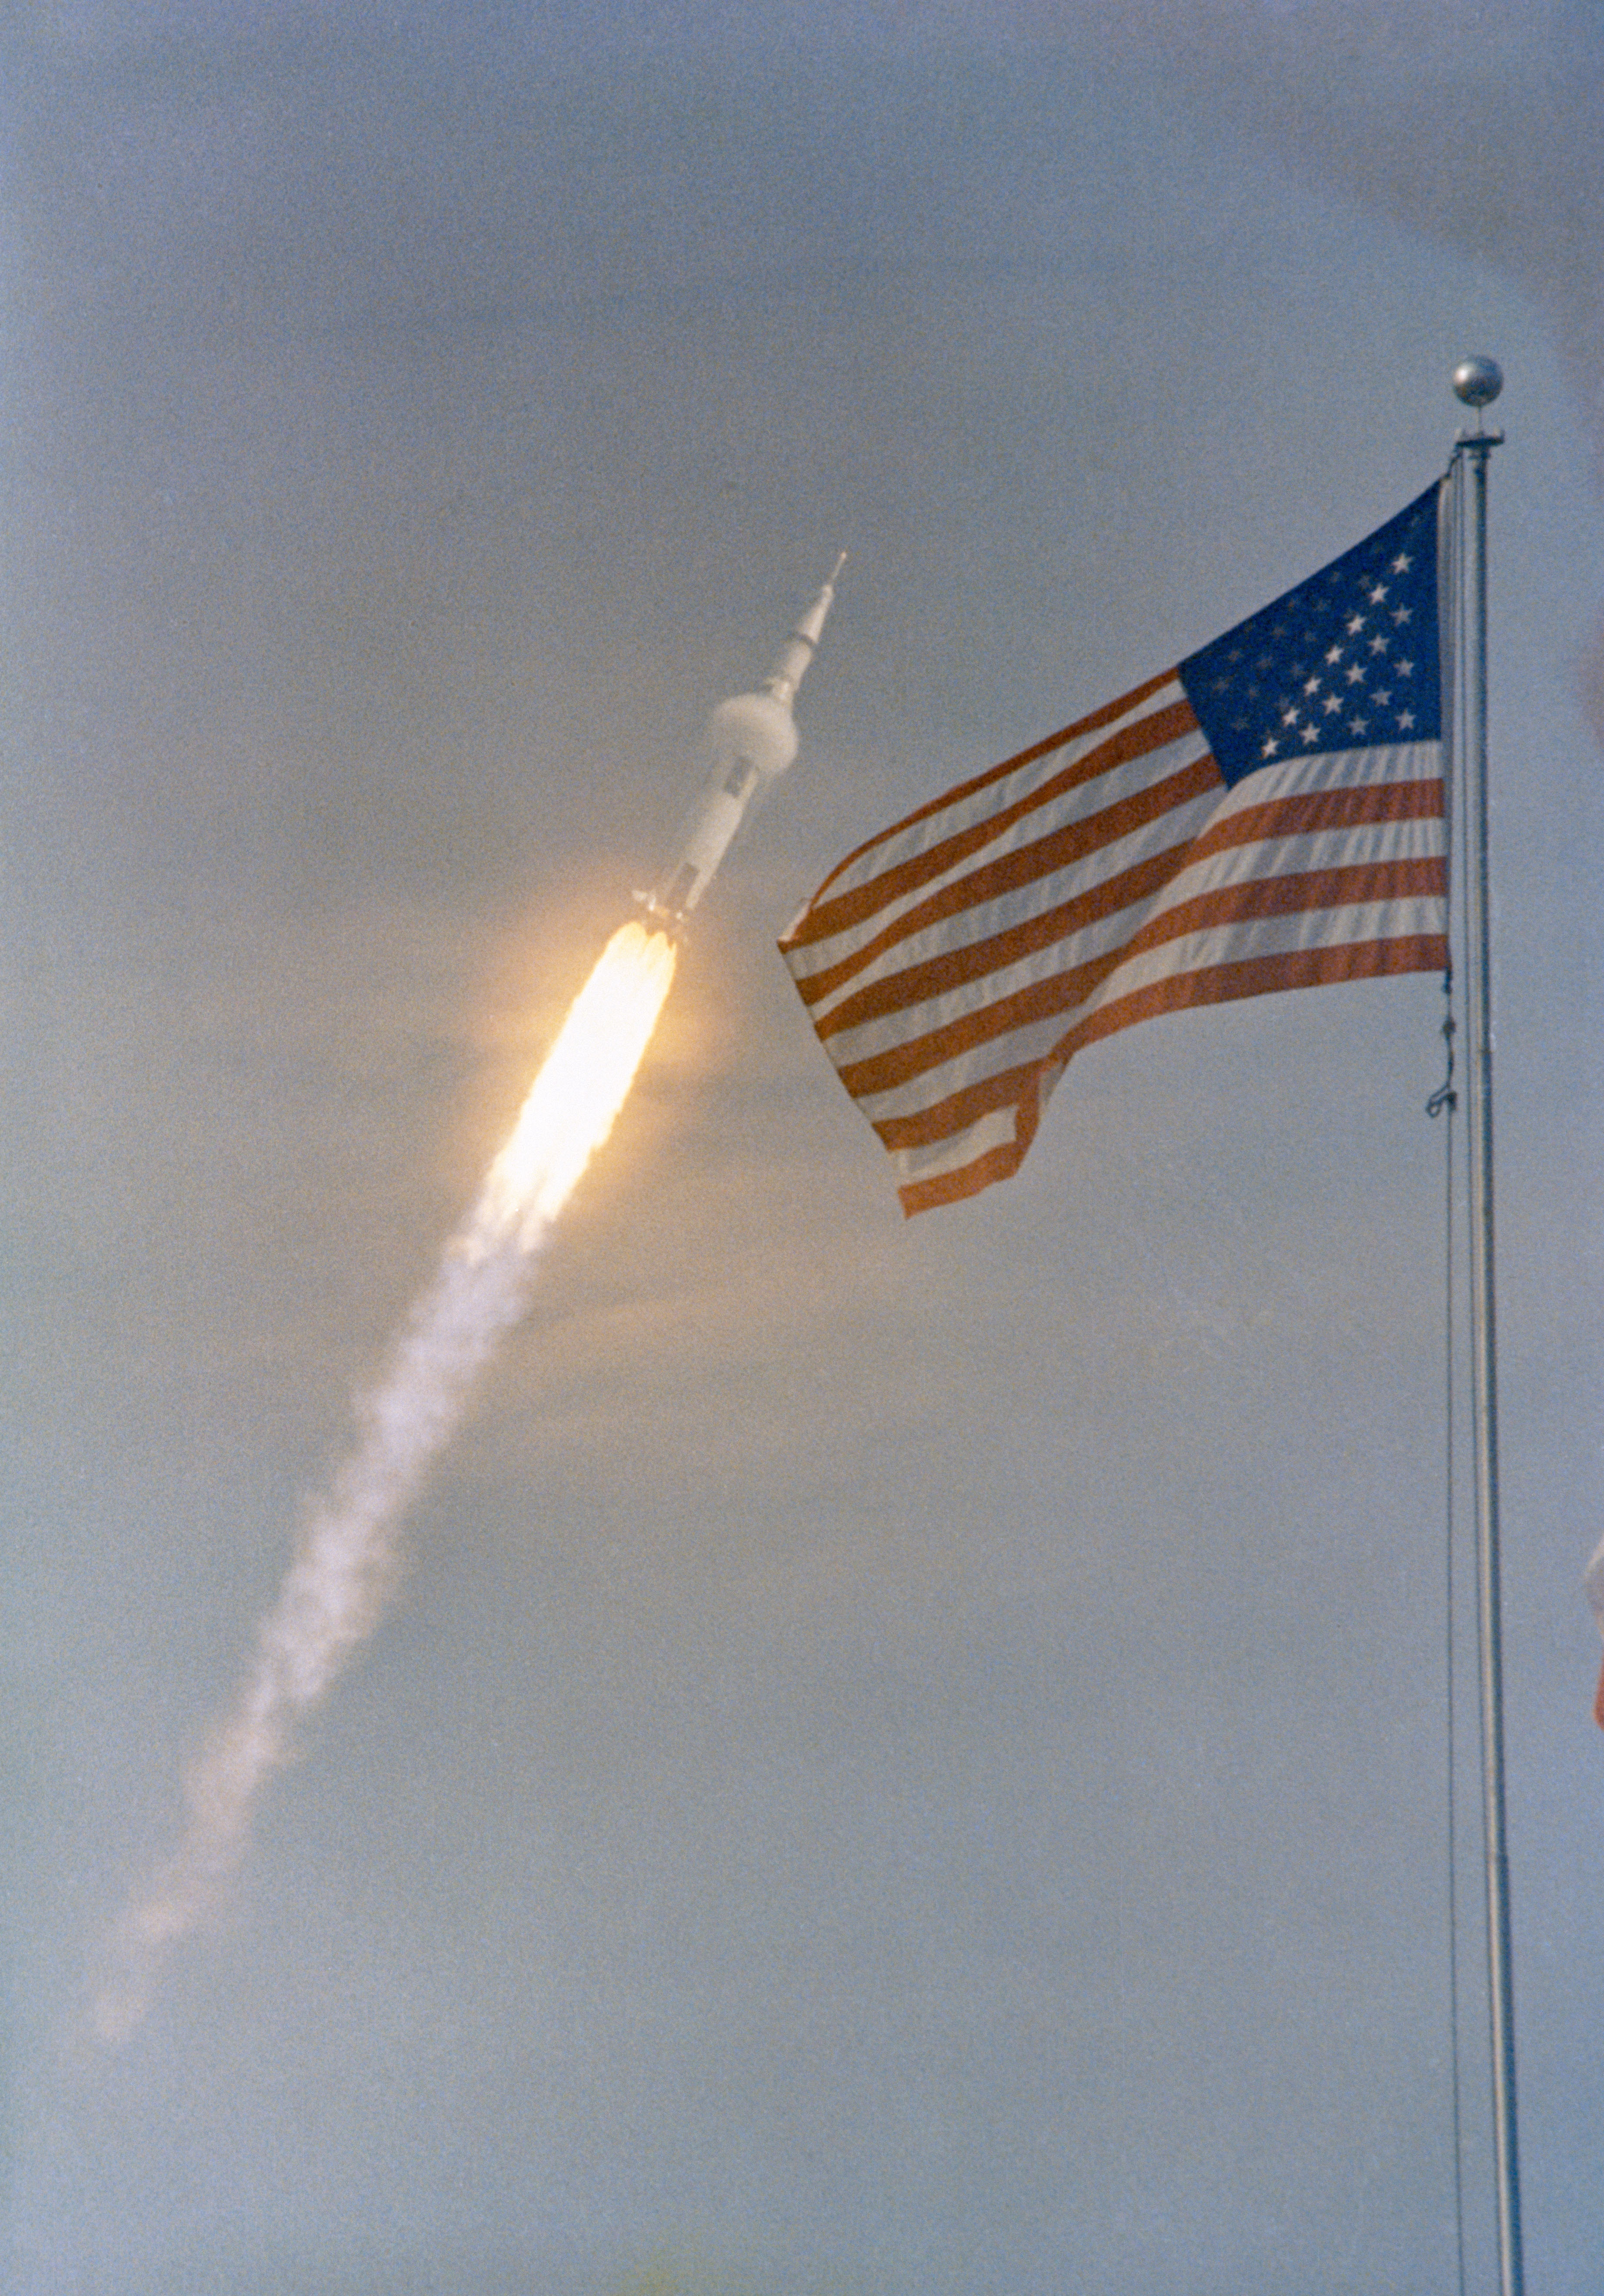 The American flag is pictured in the foreground as the Saturn V rocket for the historic Apollo 11 mission soars through the sky